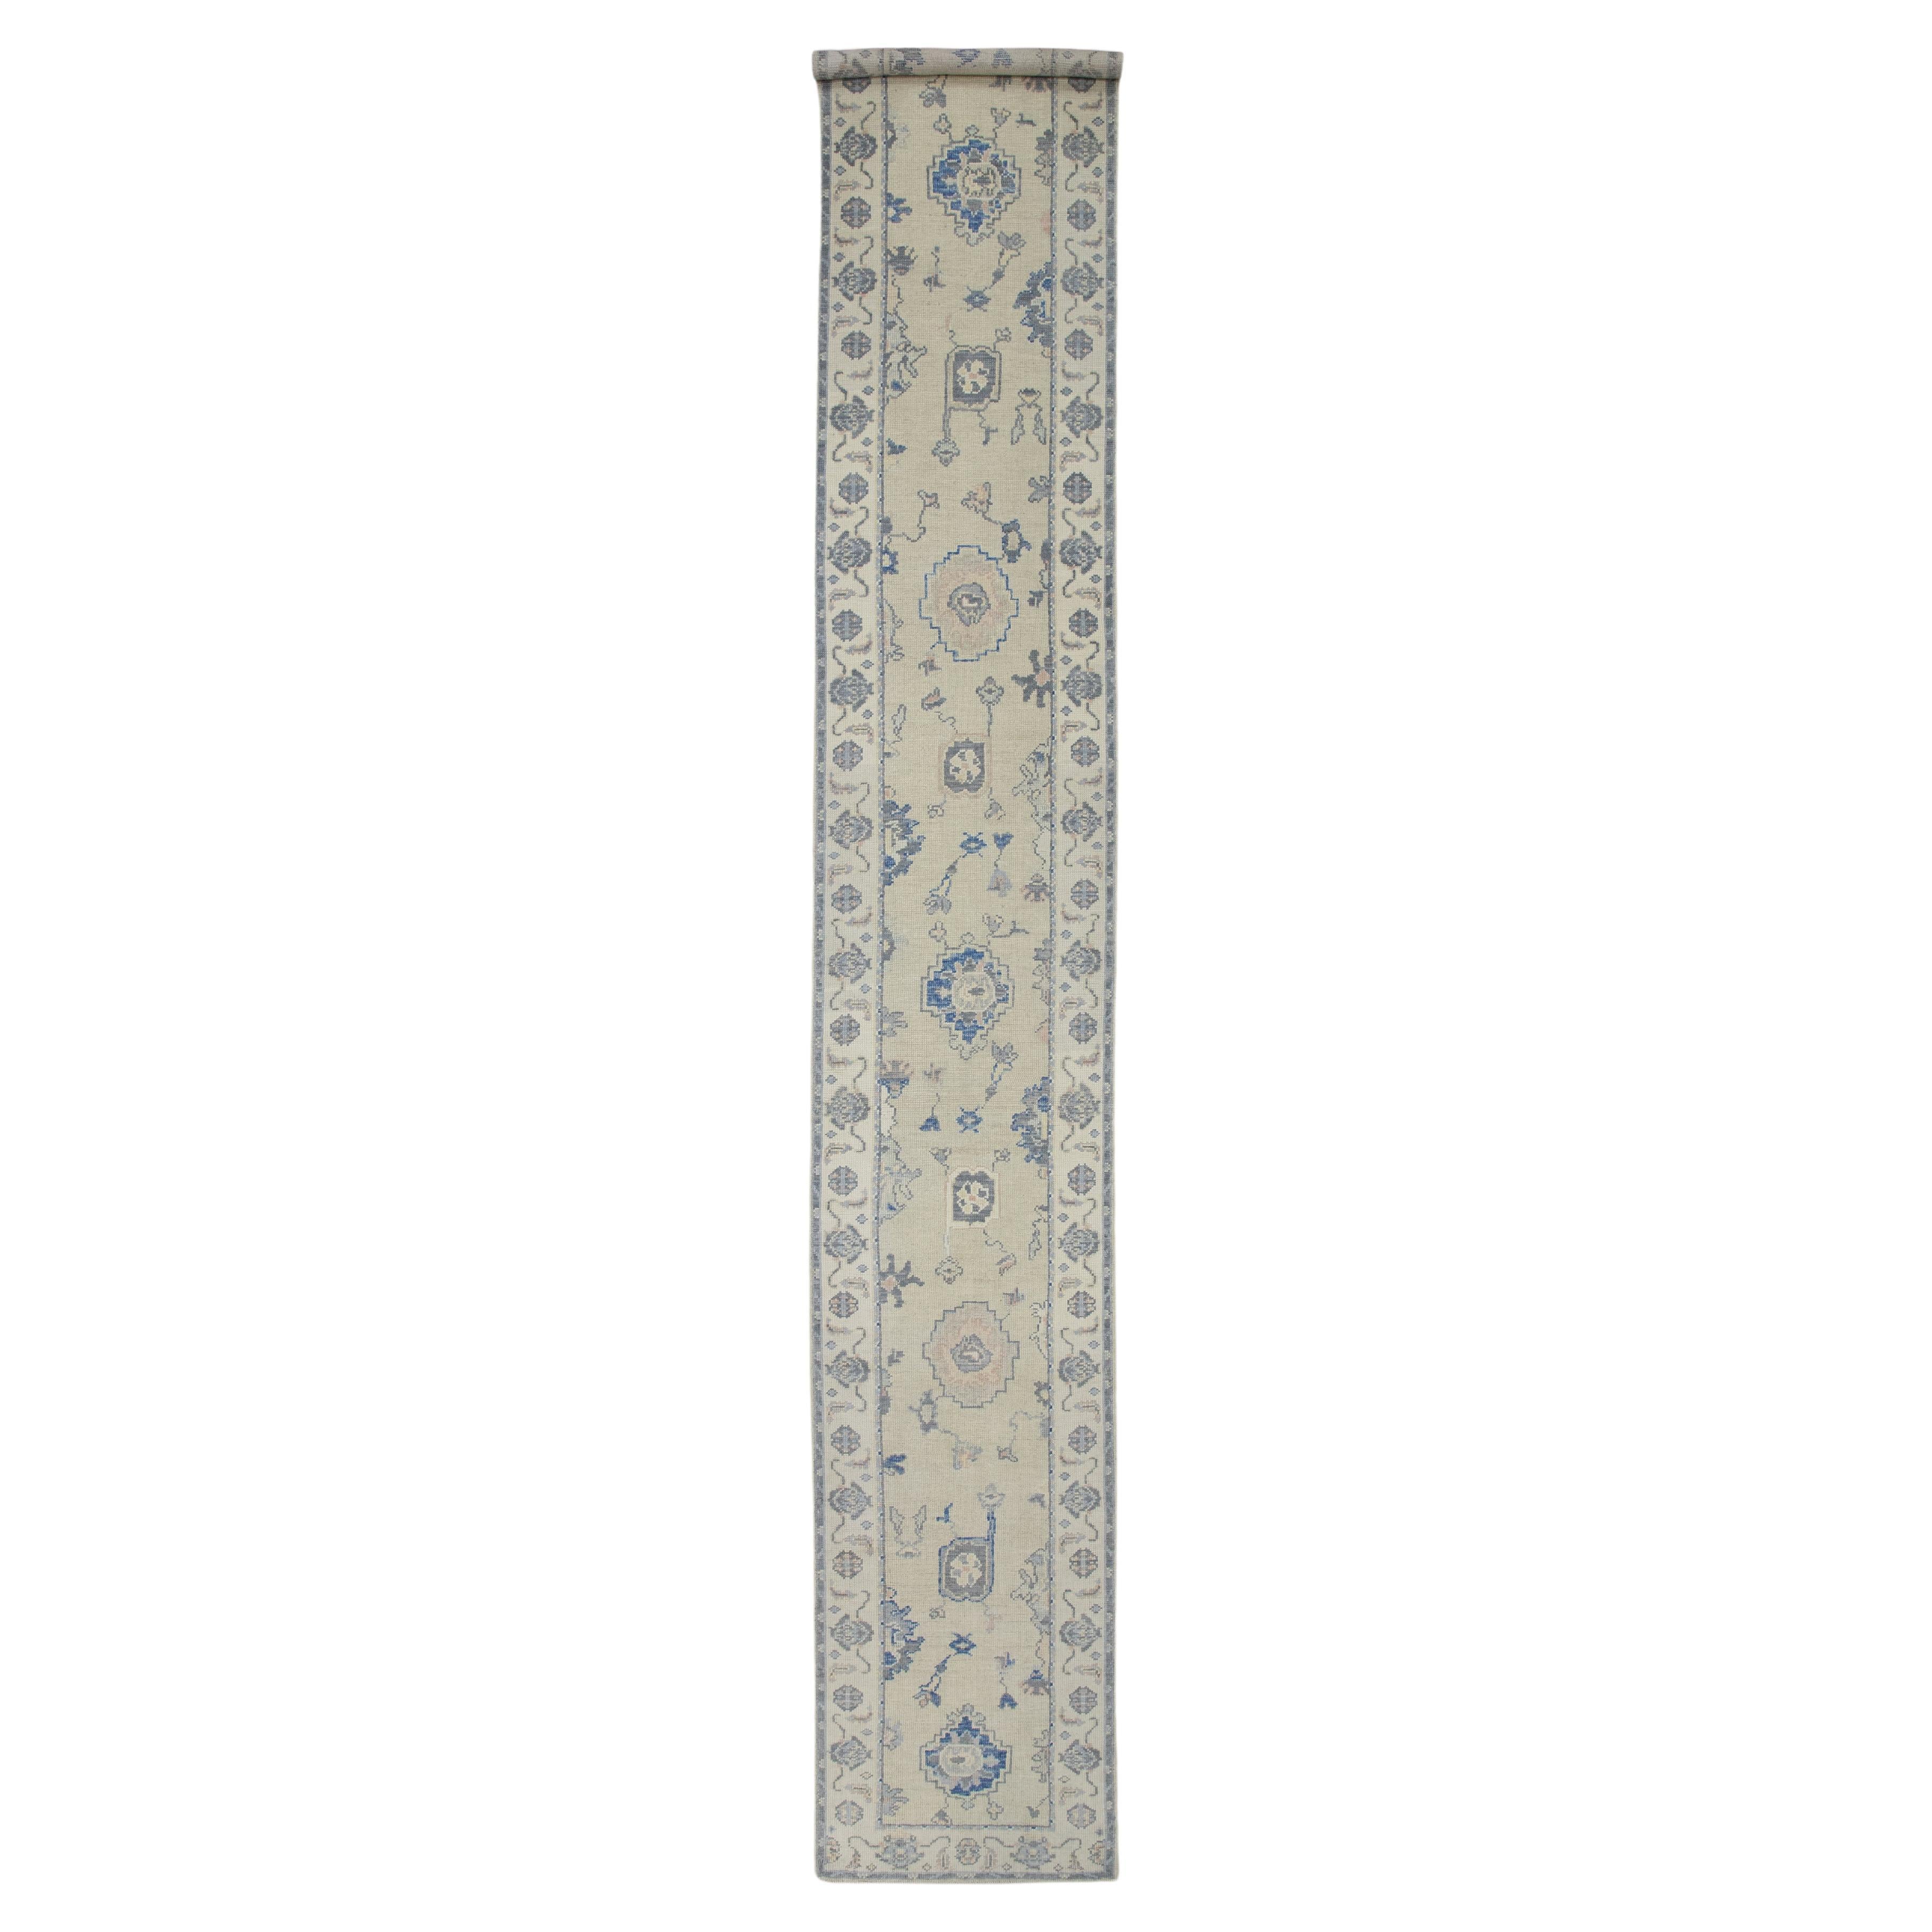 Pale Green Floral Design Handwoven Wool Turkish Oushak Runner 2'11" X 18'8" For Sale